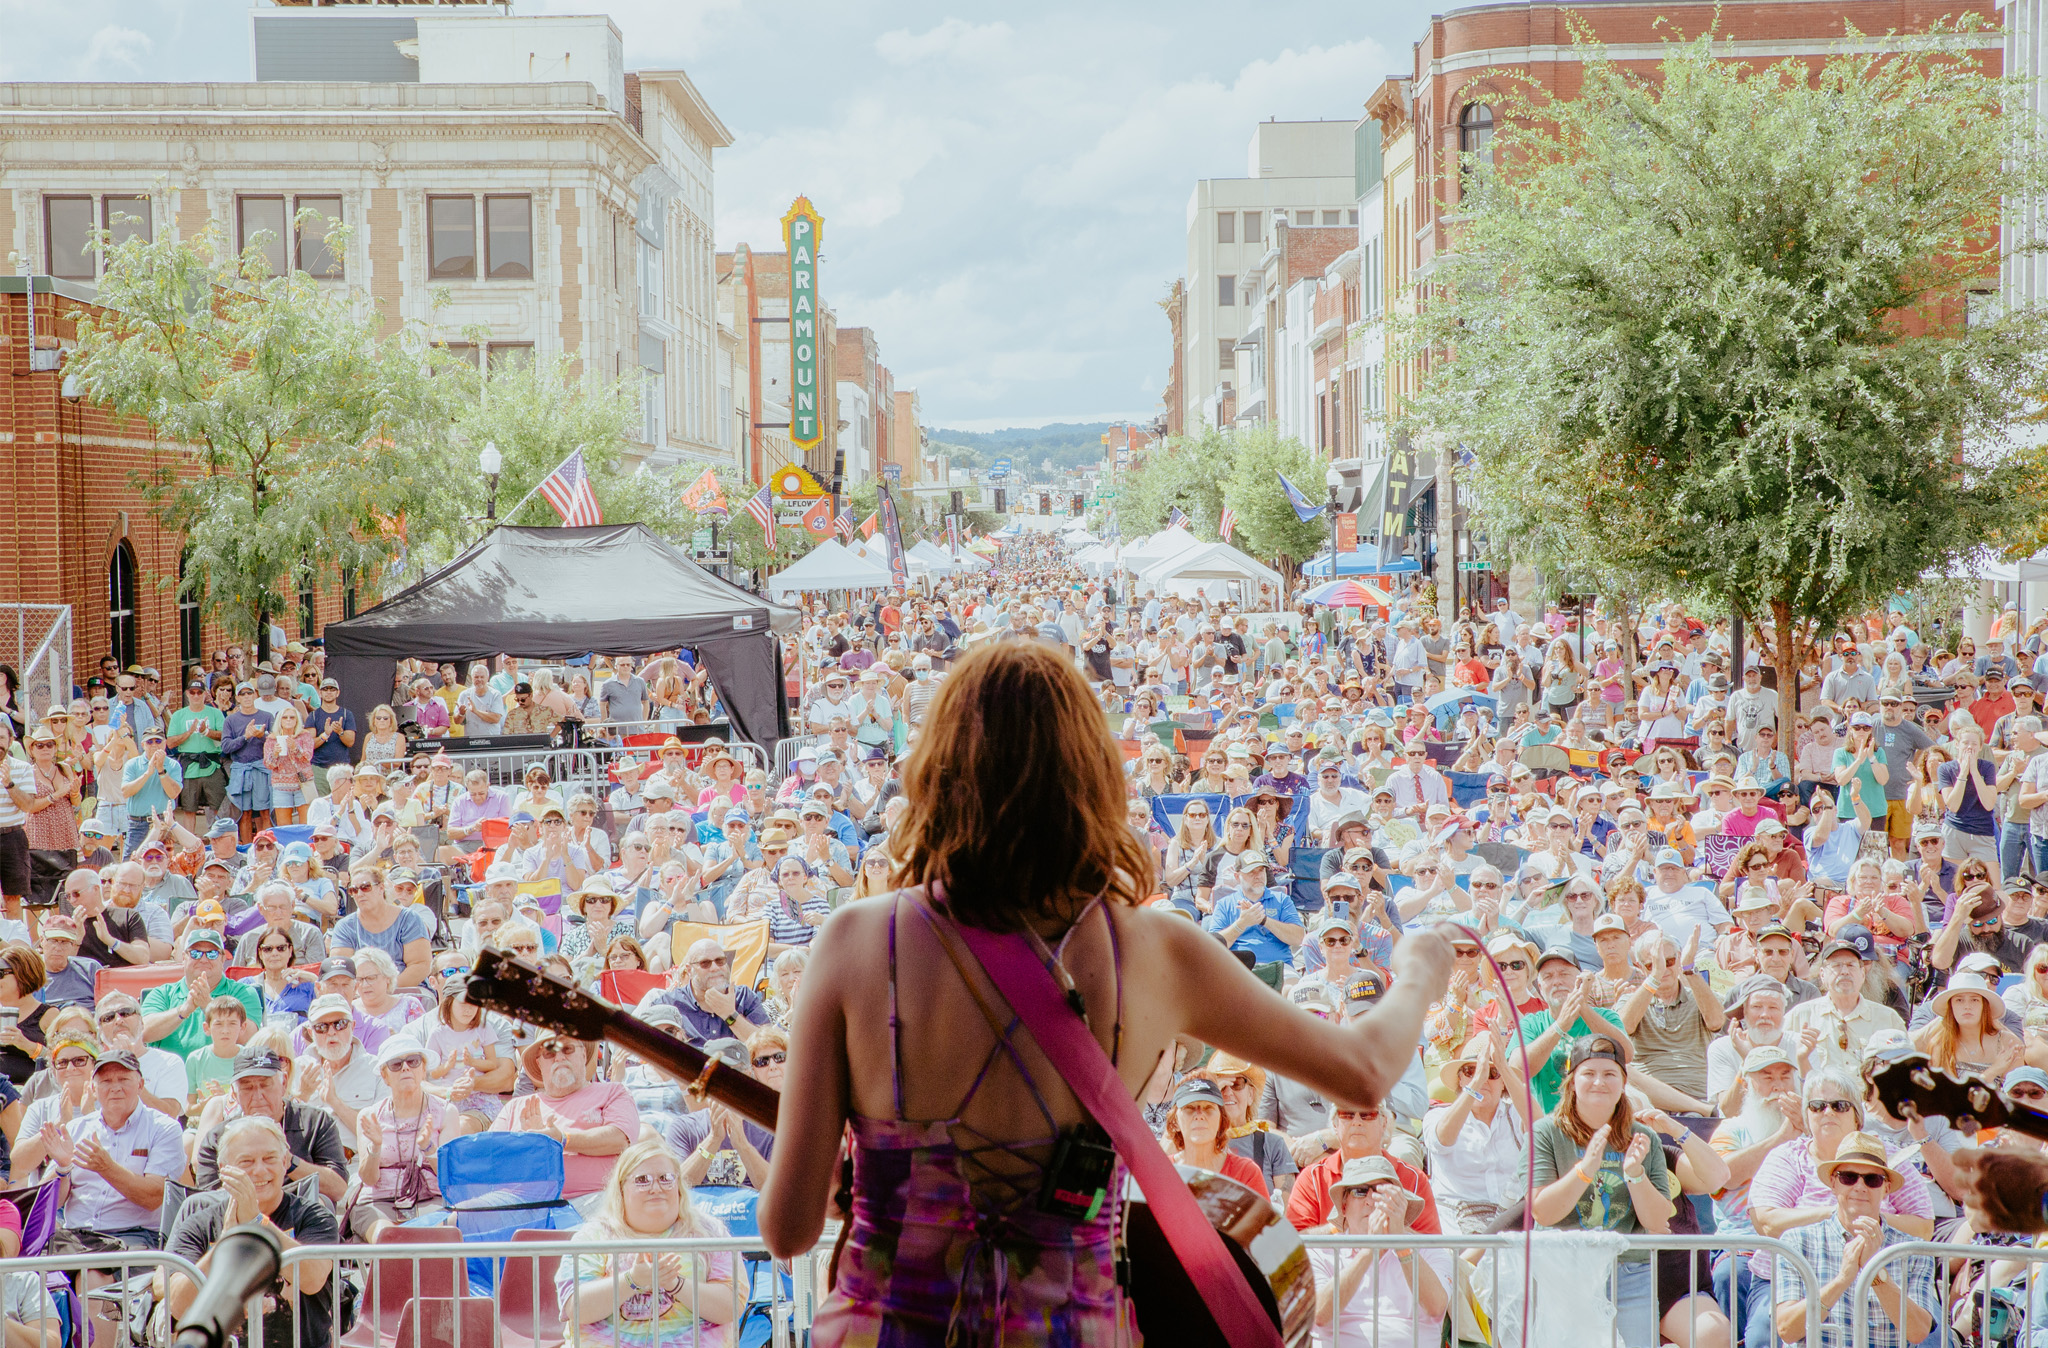 A photo taken during Bristol Rhythm & Roots Reunion music festival depicting a woman standing on stage, holding a guitar. Her back is to the camera as she is facing a sea of several thousand people as she performs for them on stage.